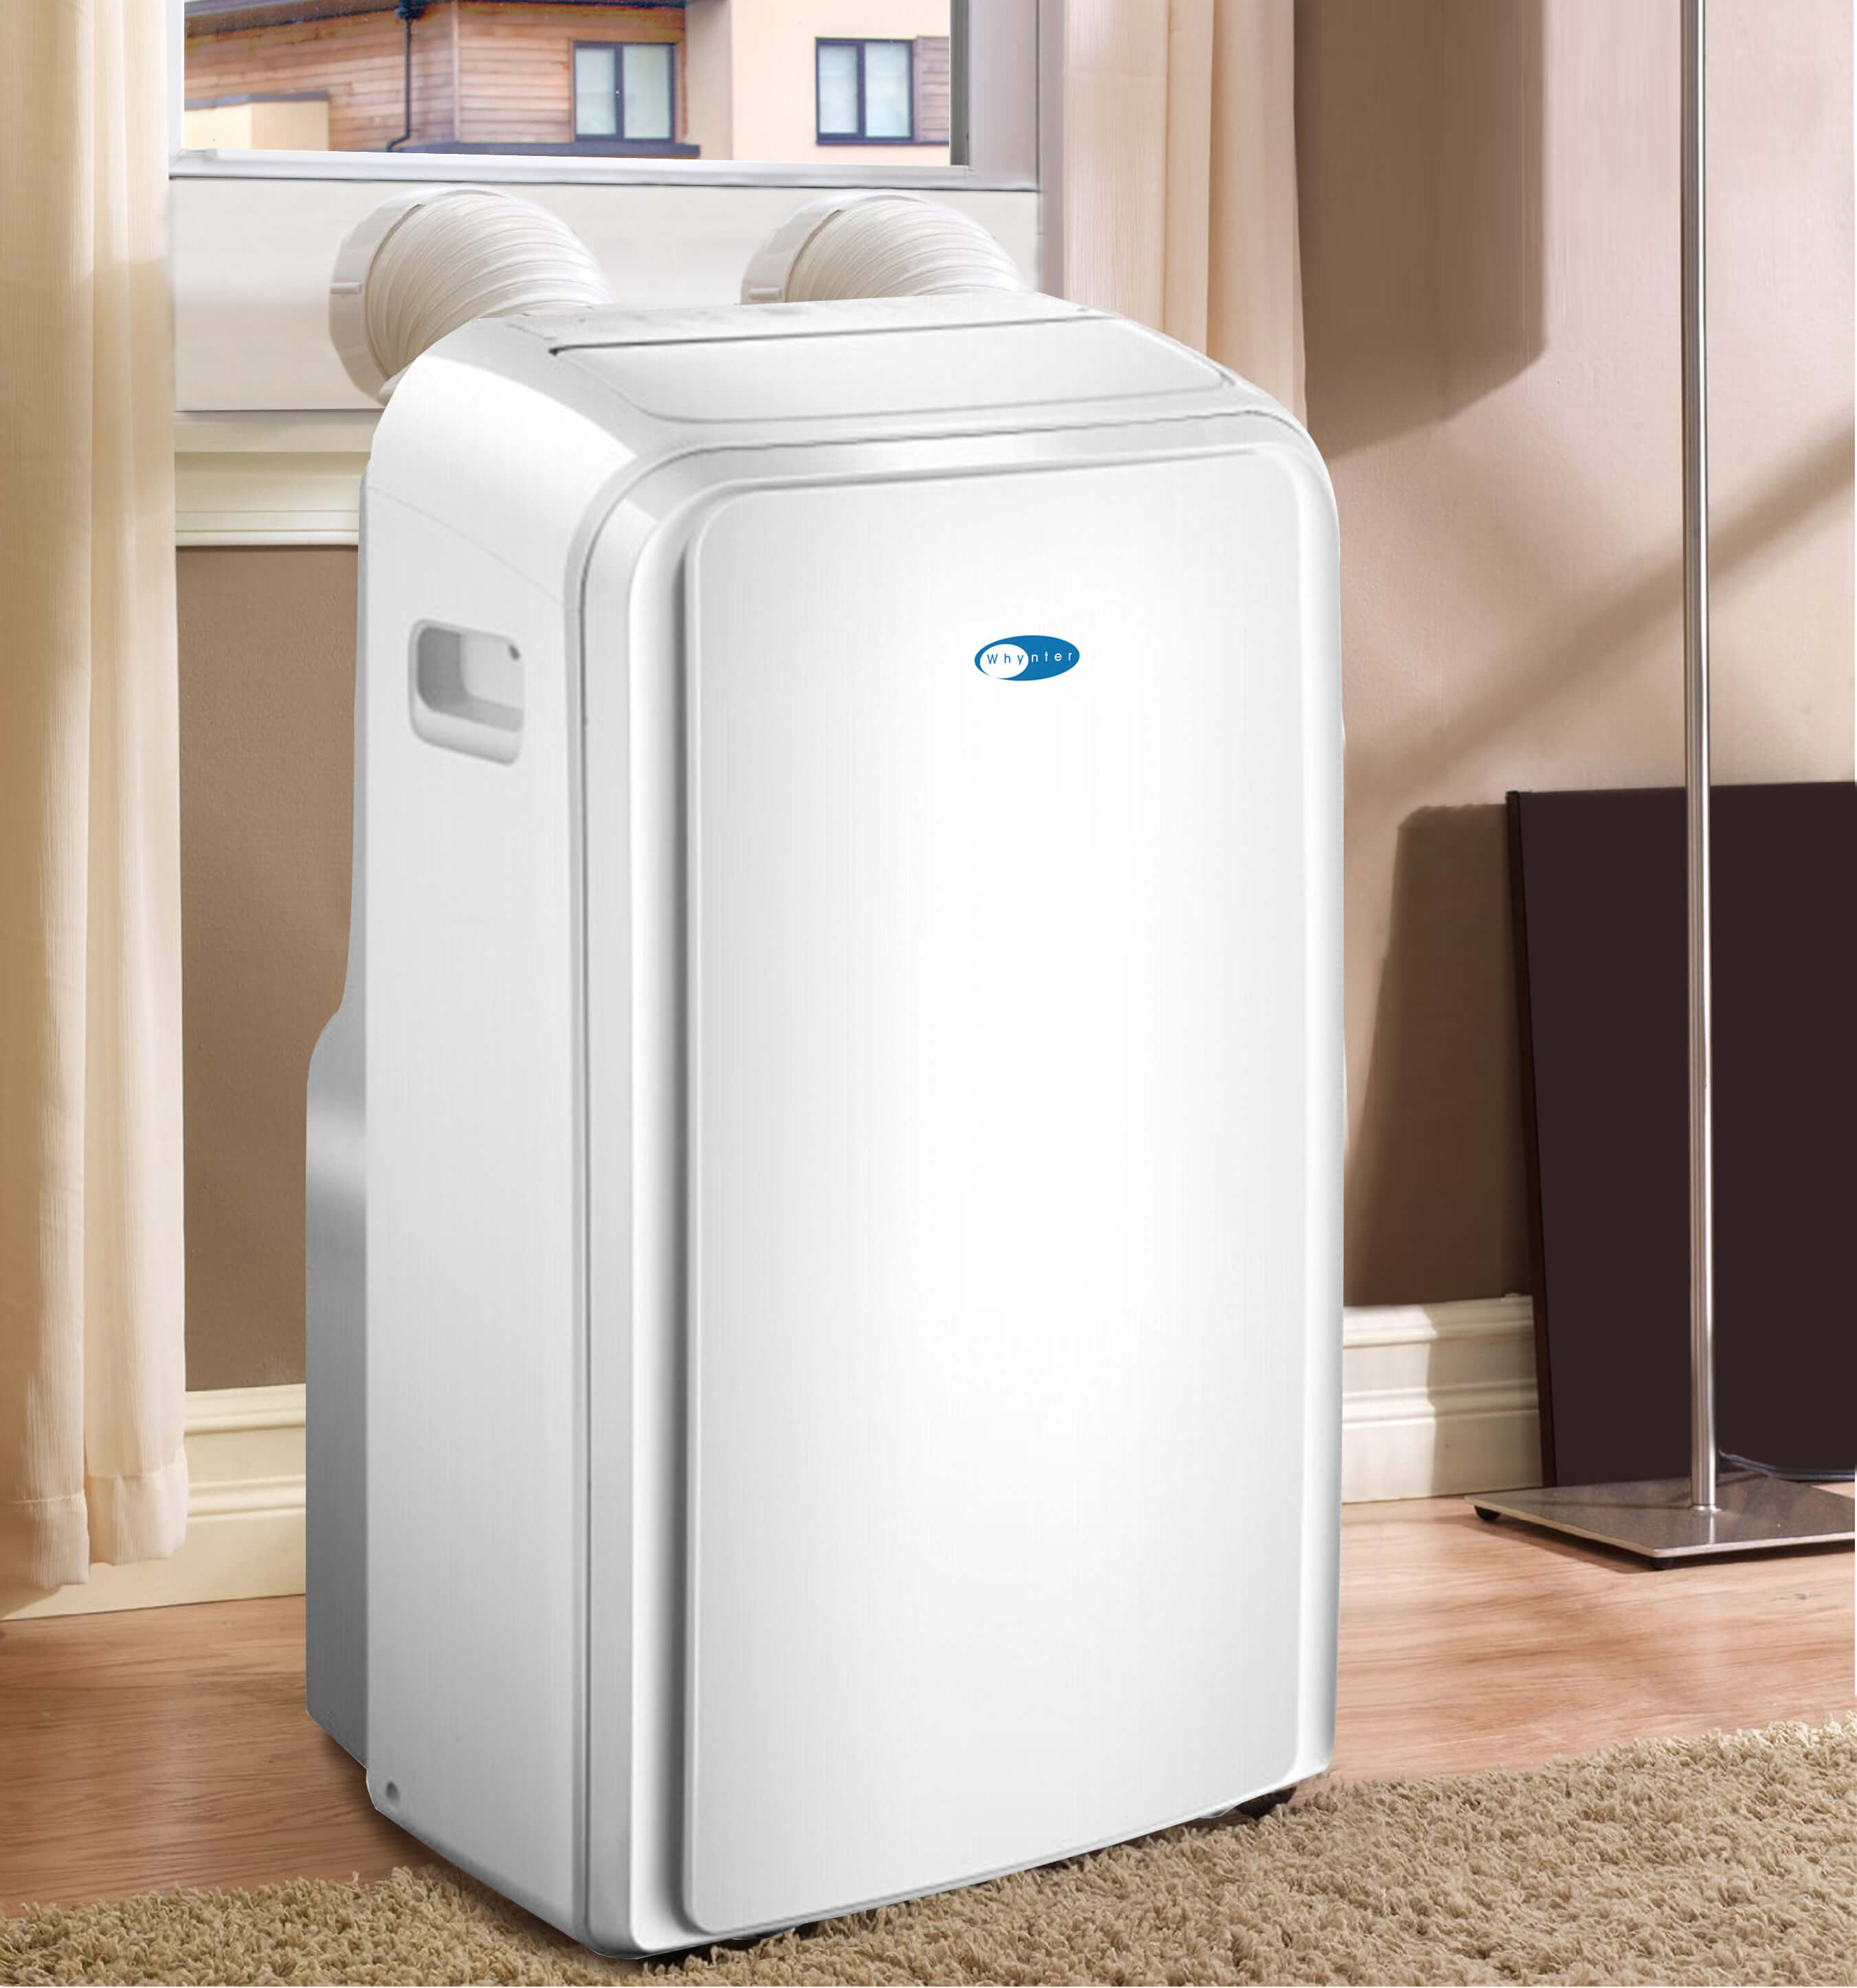 Portable Air Conditioner Shopping - How Thoughts Your Cool When Buying